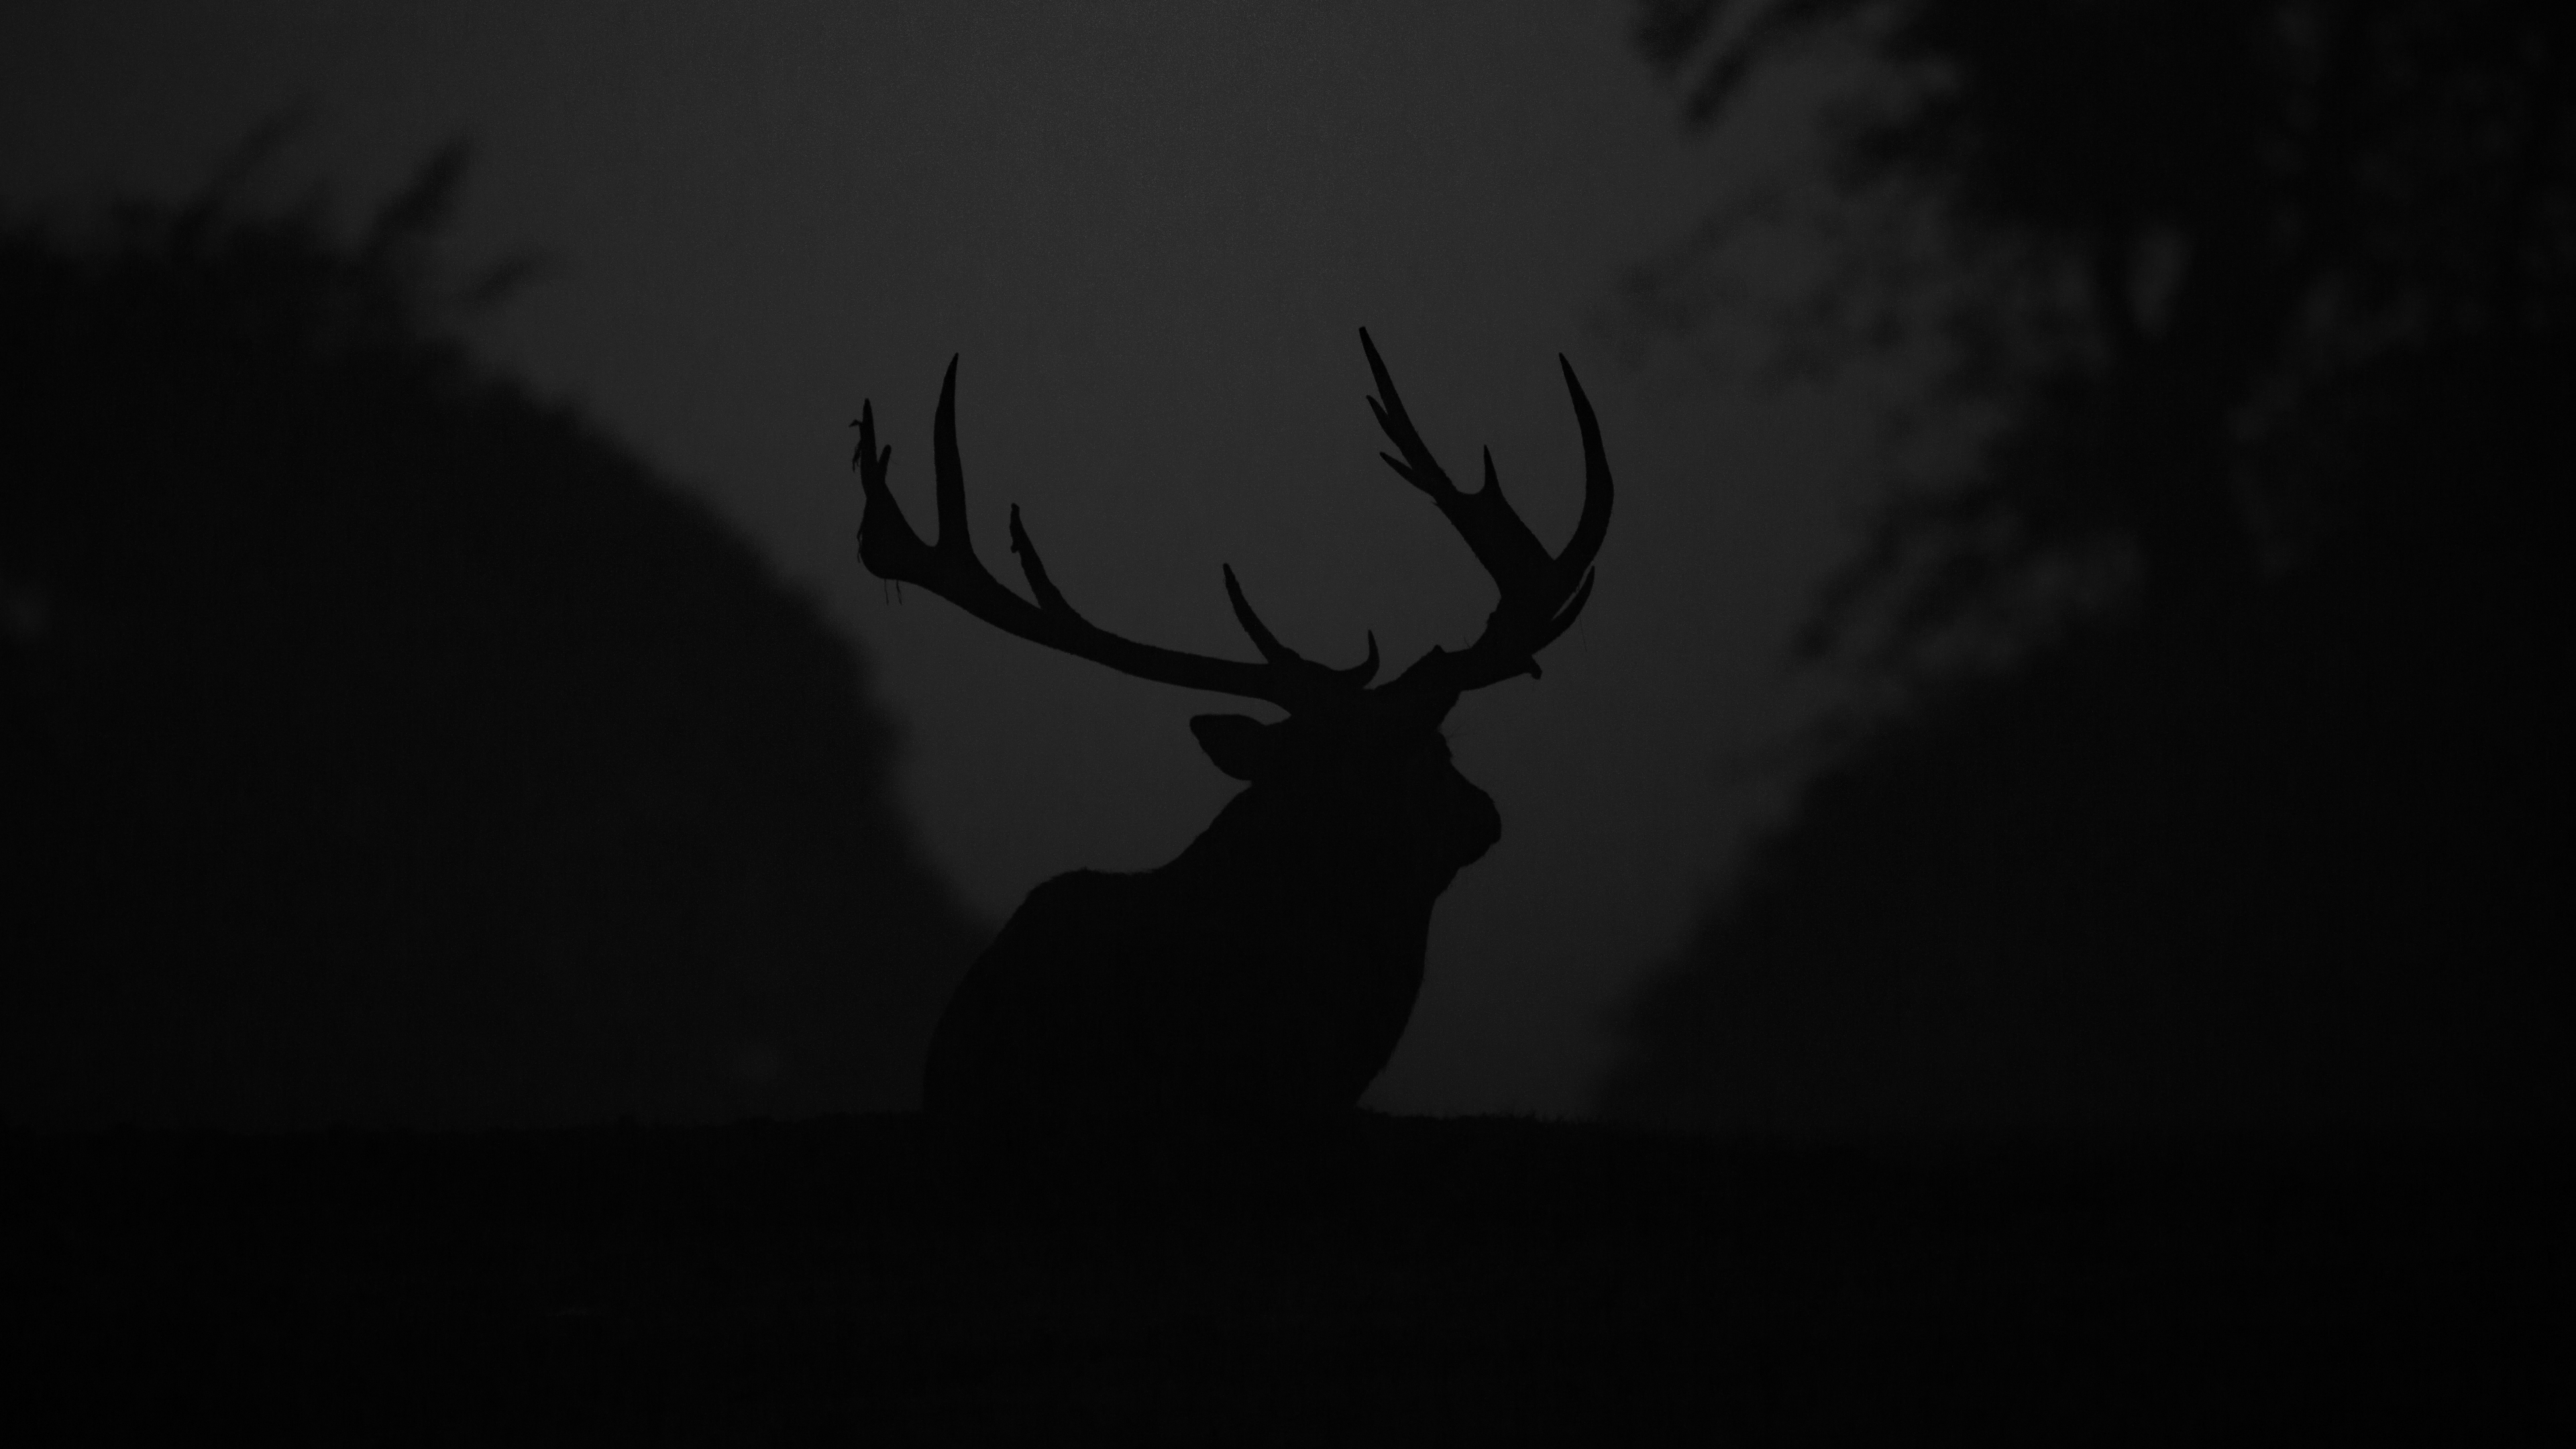 deer
            standing on road, black and white - complimentary to the deer styled
            website logo